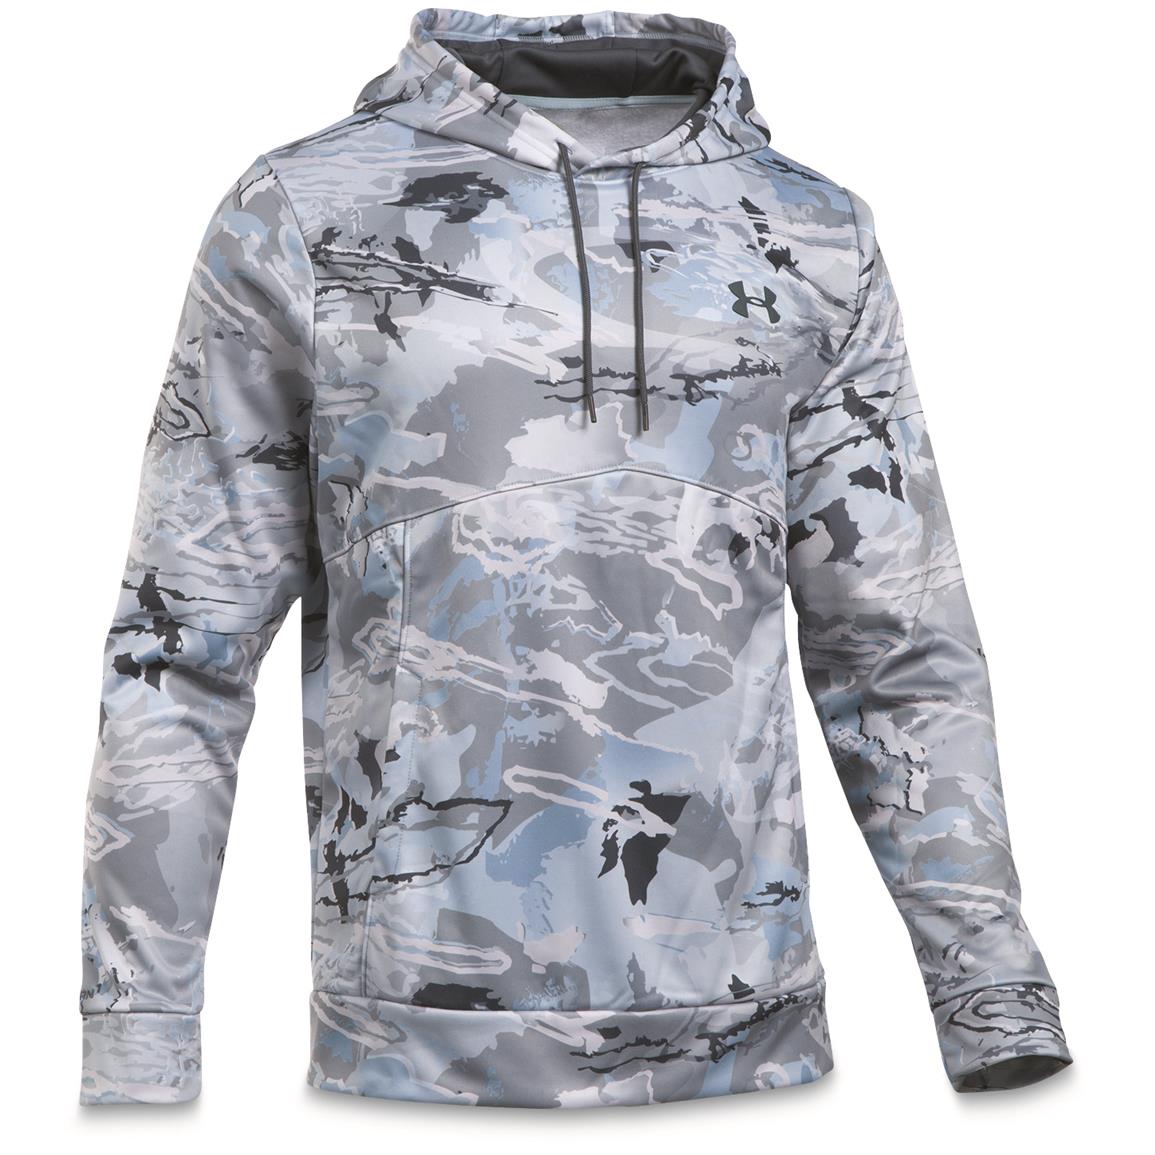 Under Armour Men's Icon Water Resistant 